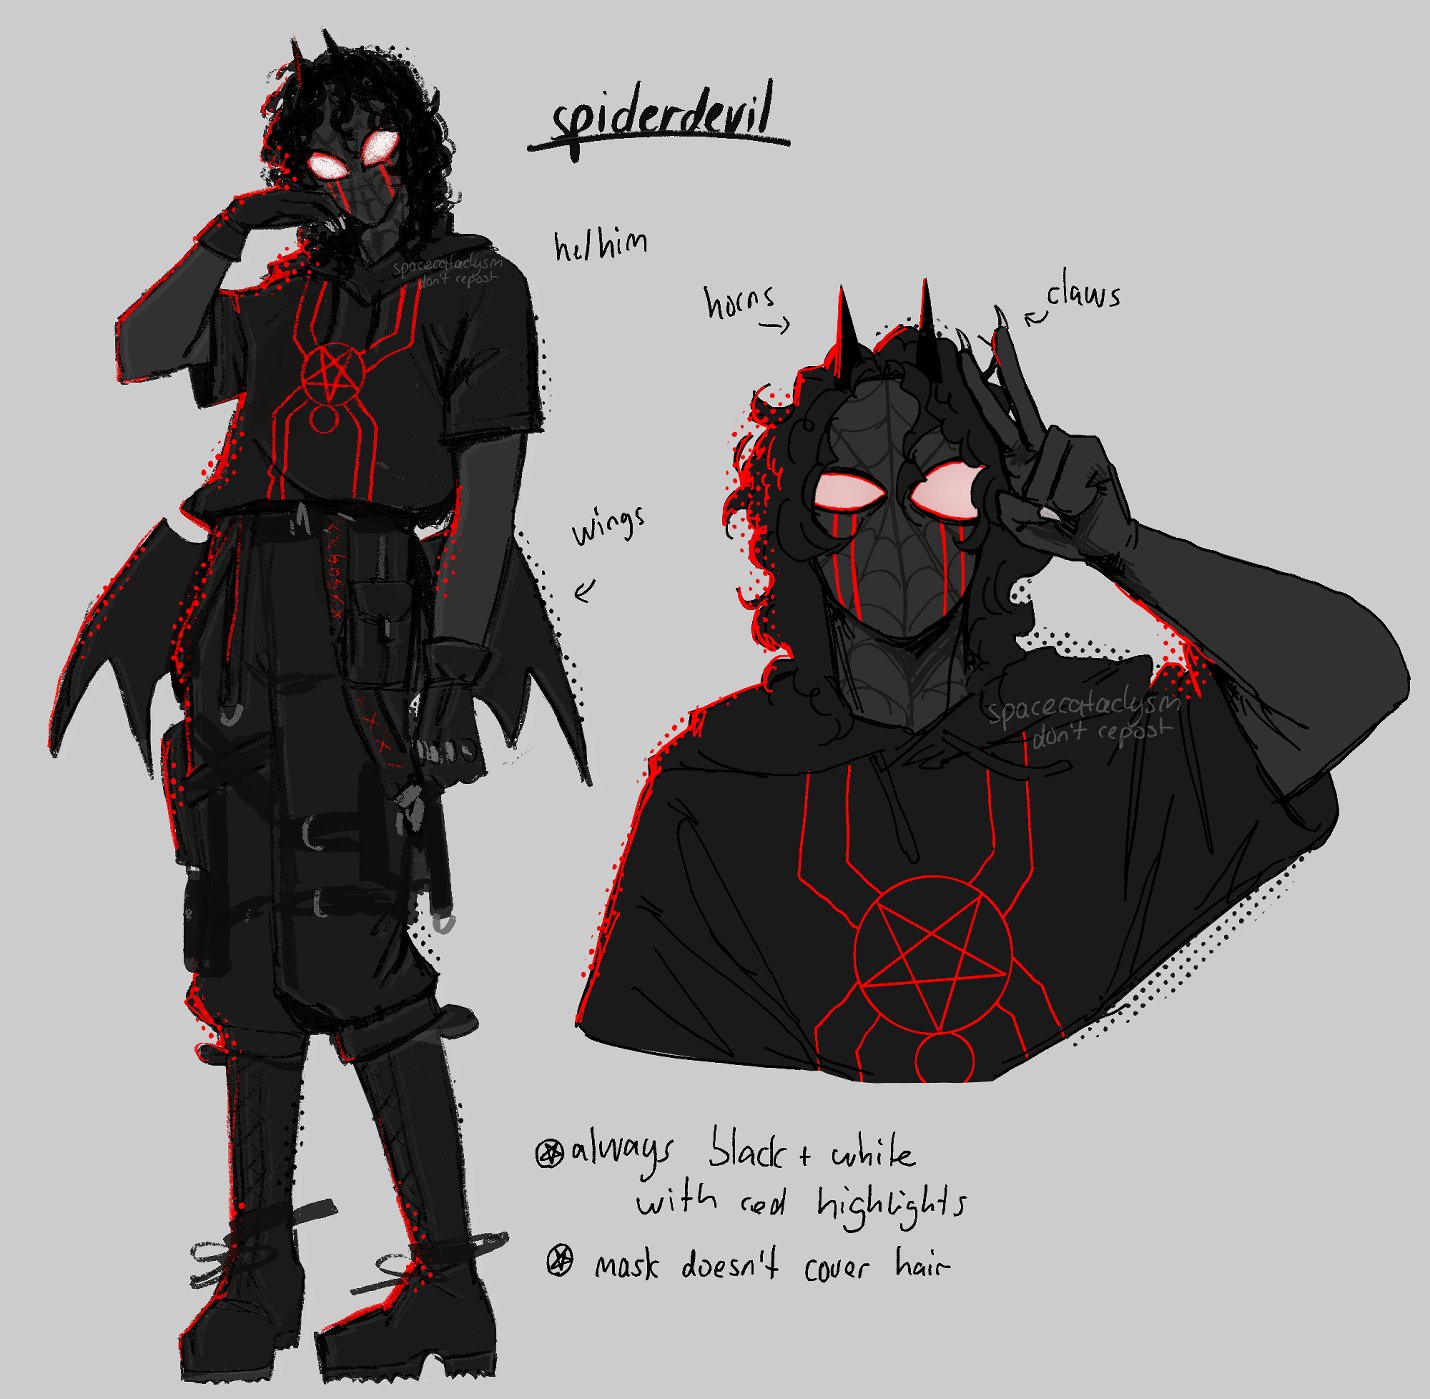 P4️⃣NX on X: Spider-NightCat is one heck of a name #spidersona  #DrawYourSpiderVerse #SpiderVerse  / X